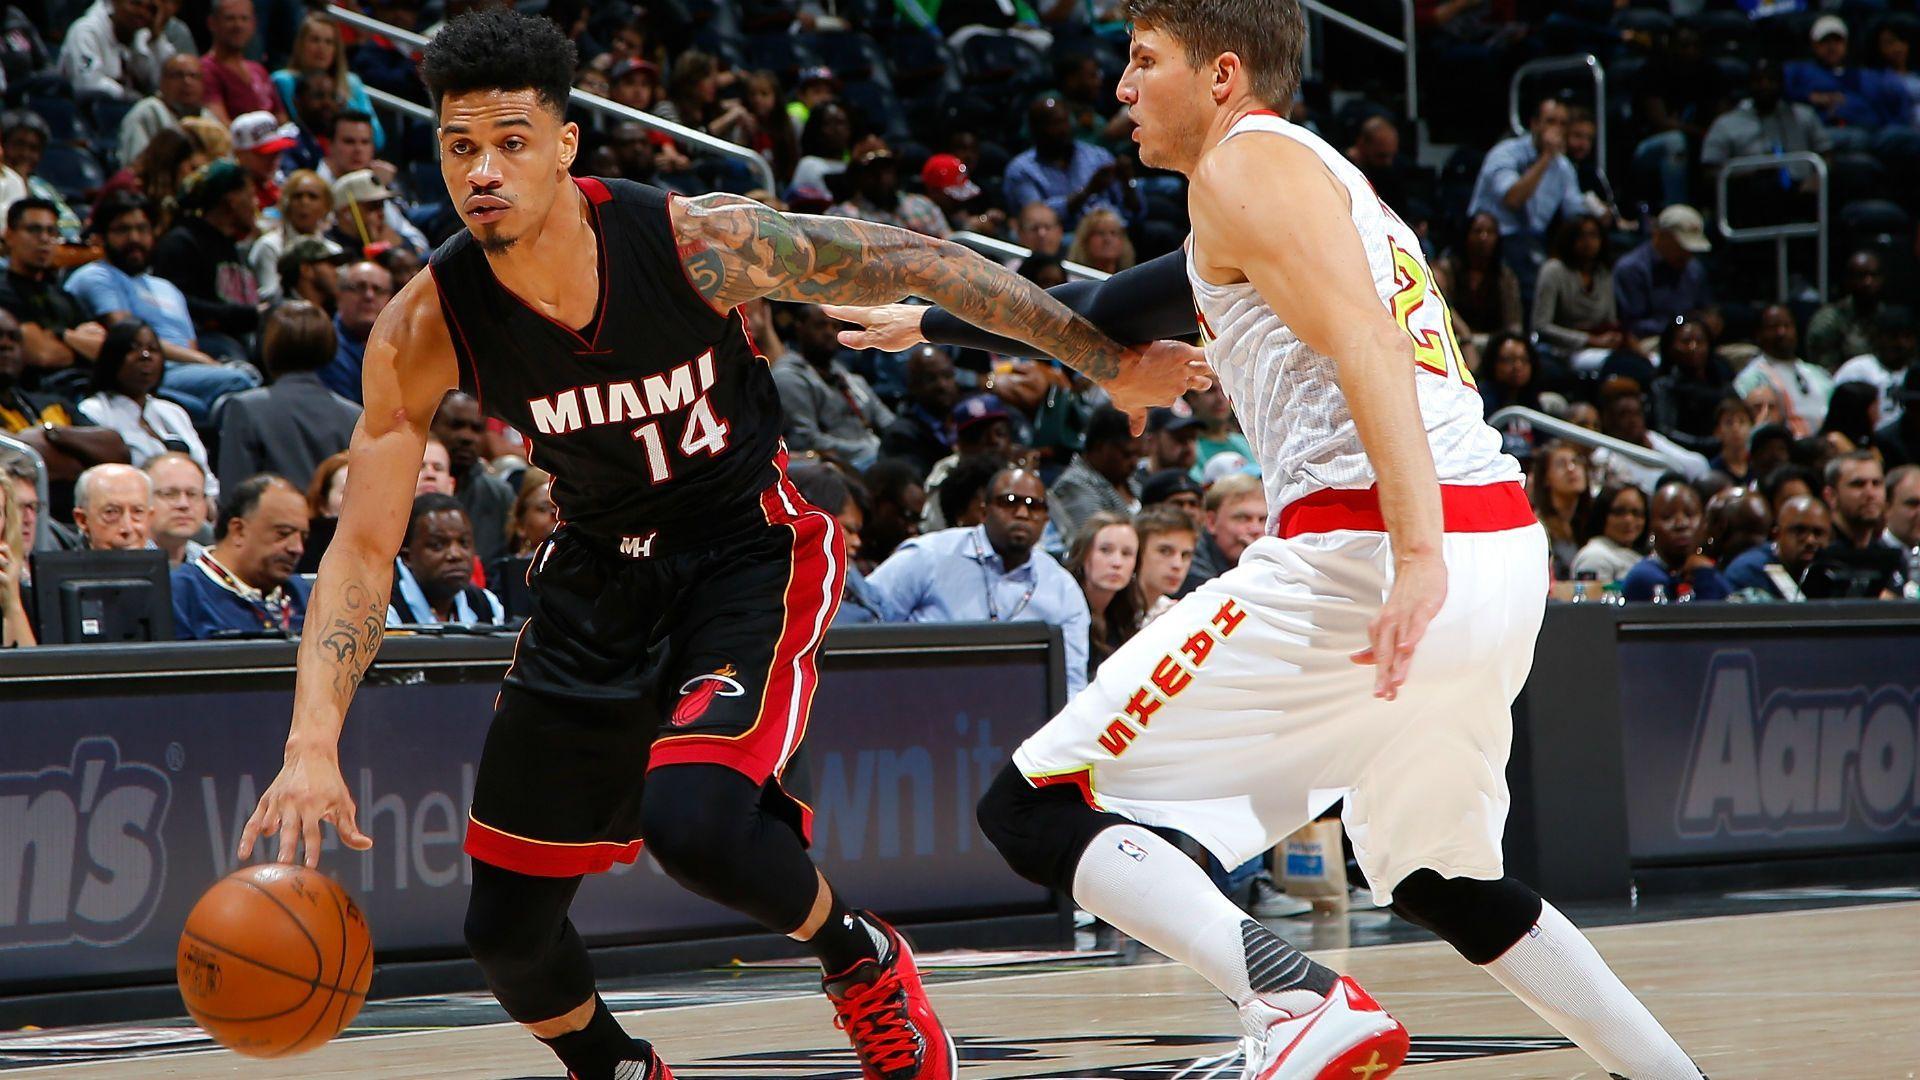 Report: Heat's Gerald Green released from hospital, back home